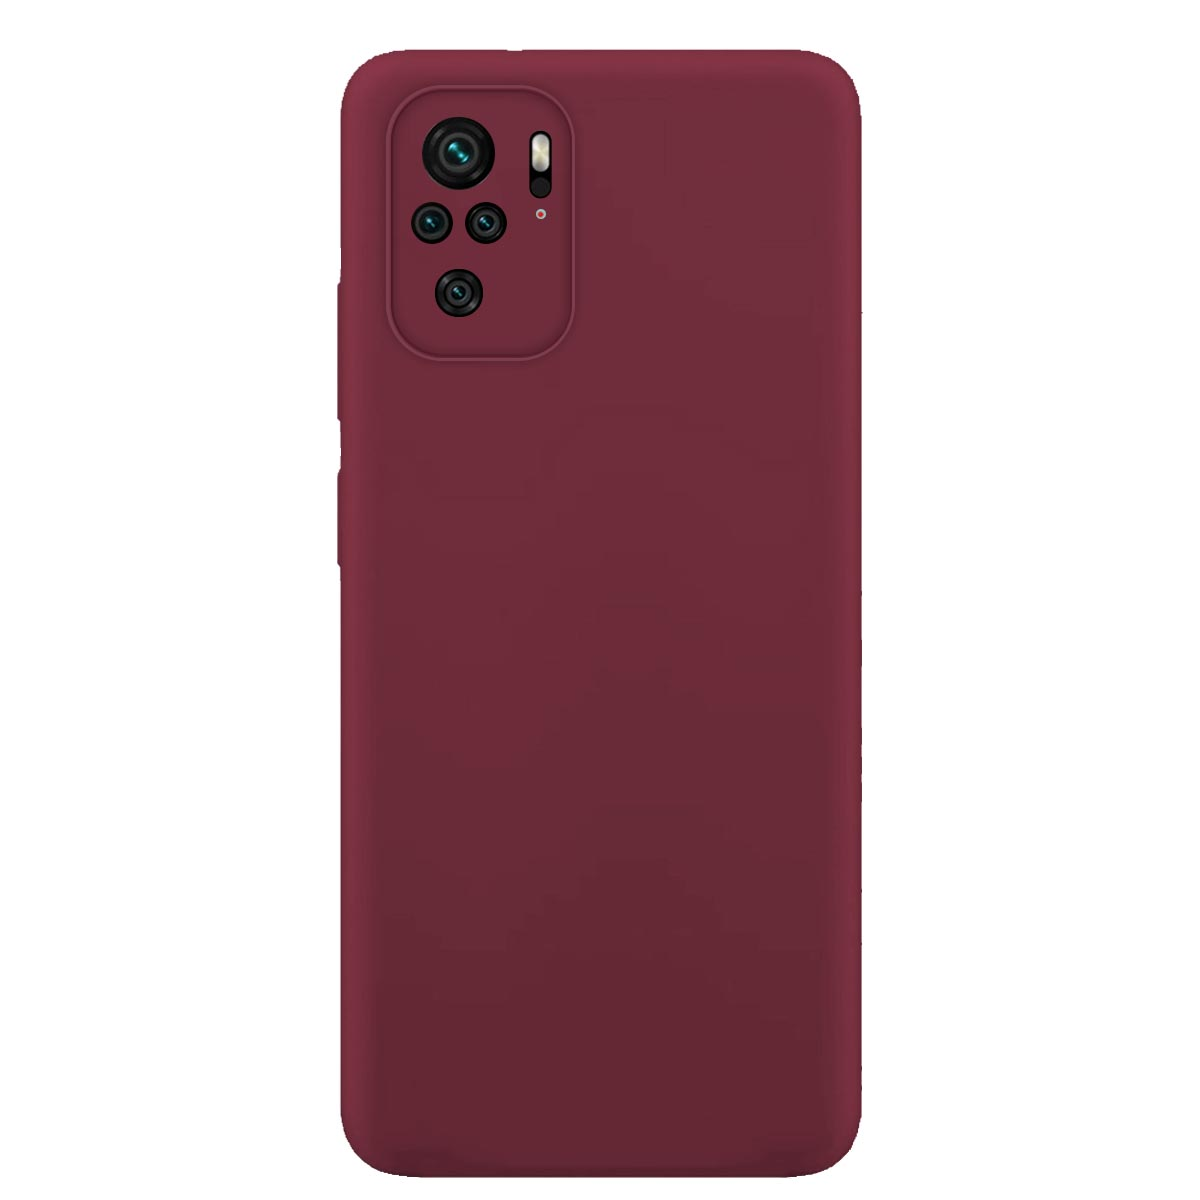 MTB MORE Soft Silikon Backcover, Redmi Weinrot Xiaomi, 10 10S, Redmi 4G, Note ENERGY Note Case